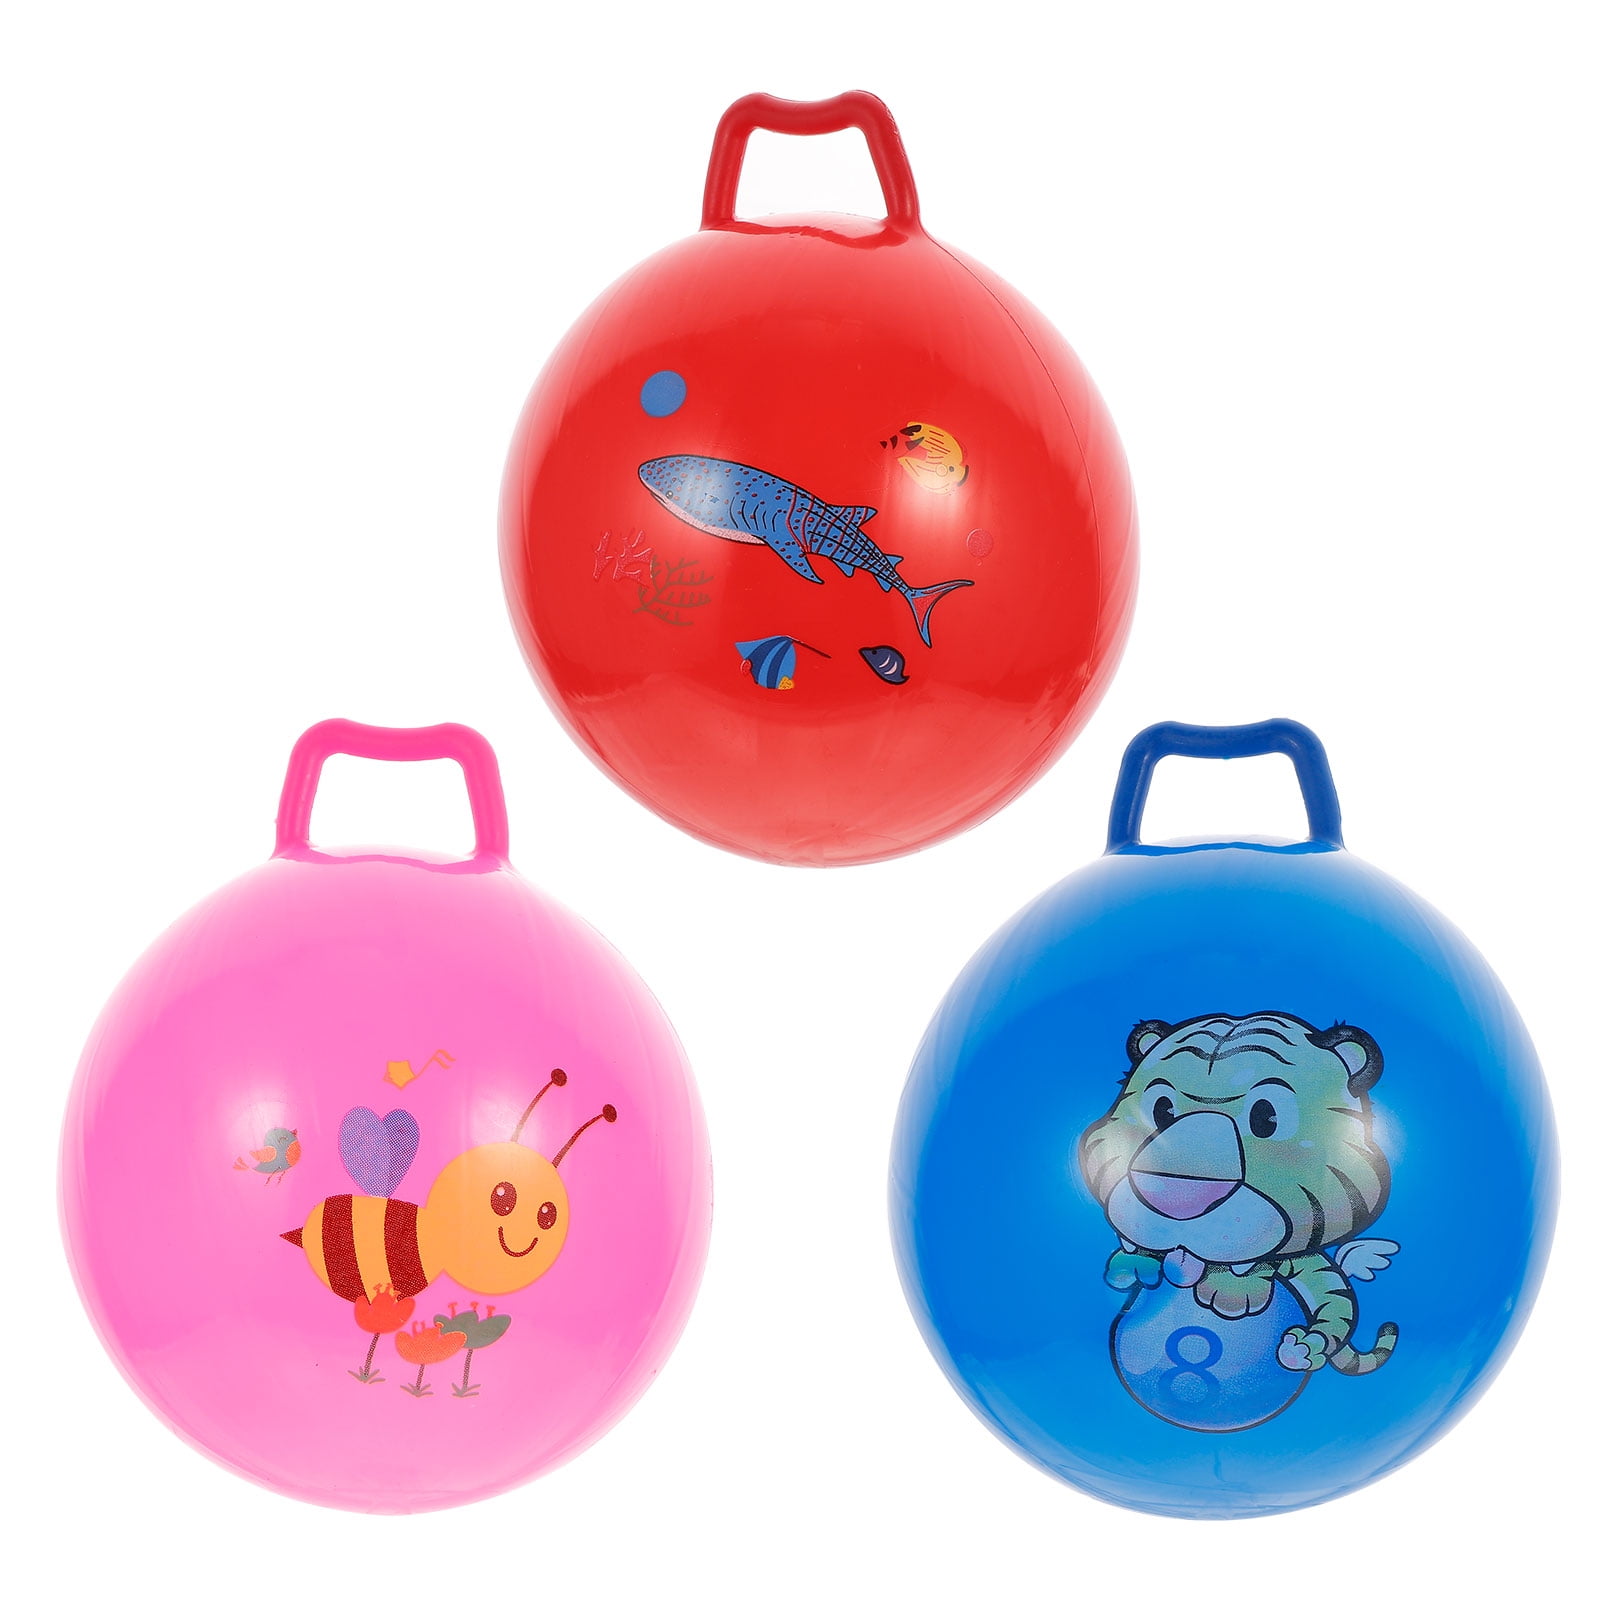 Miraculous Ladybug Hopper Ball In Color Box 